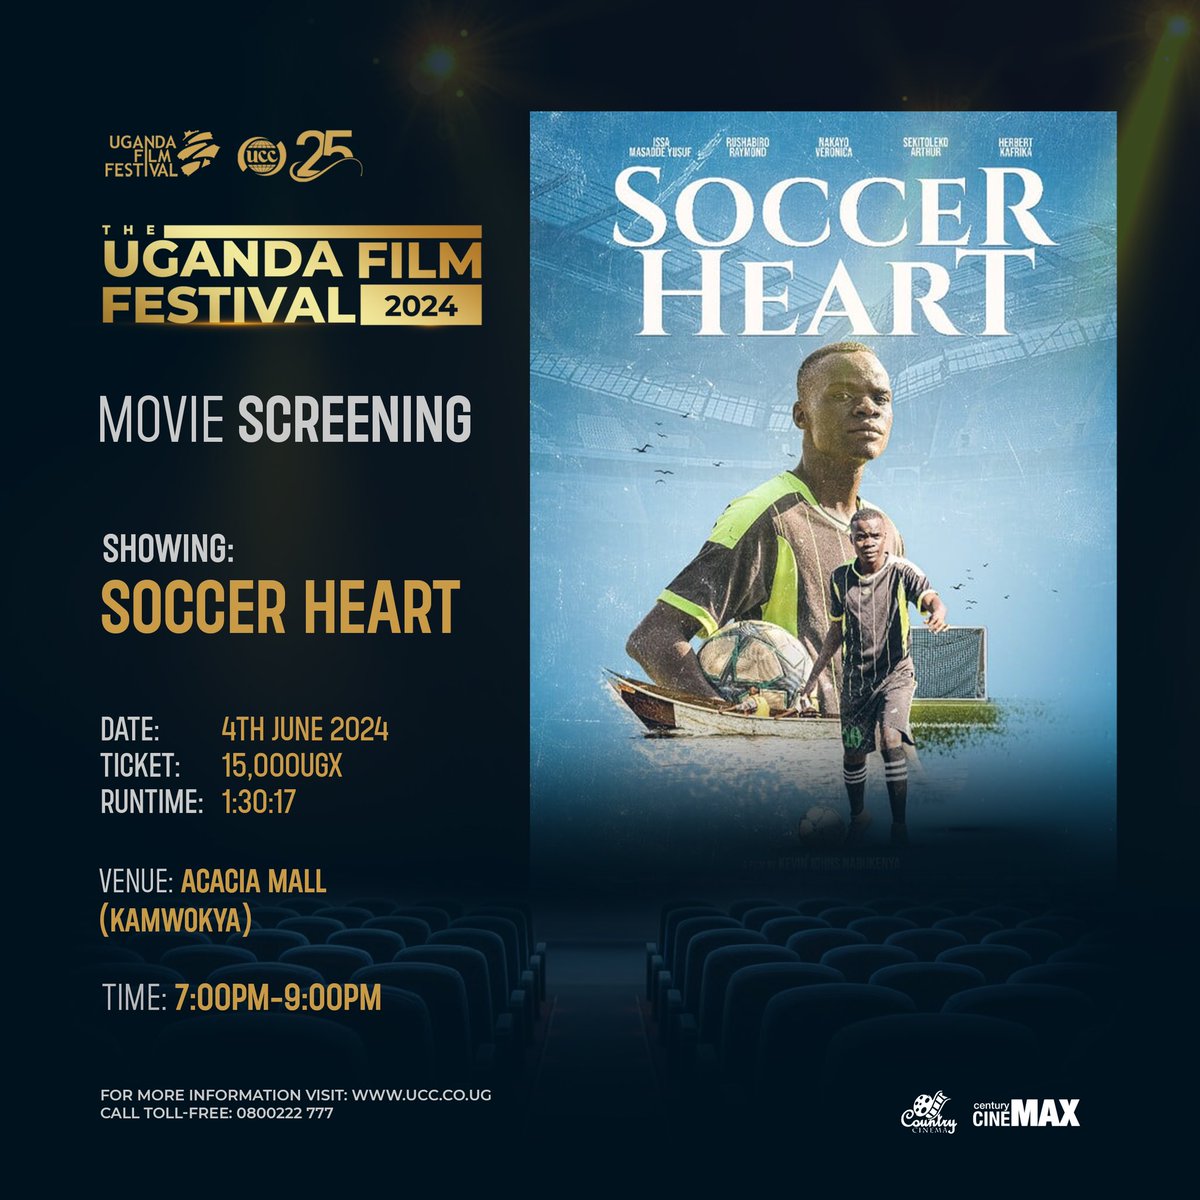 Uganda Film Festival brings to you all you yet to be favorite Ugandan movies.

You can watch all these amazing Ugandan movies at Acacia mall at fair fee of 15k ugx 

Don't miss out!

#UFF2024|| #localstoriesGlobalImpact